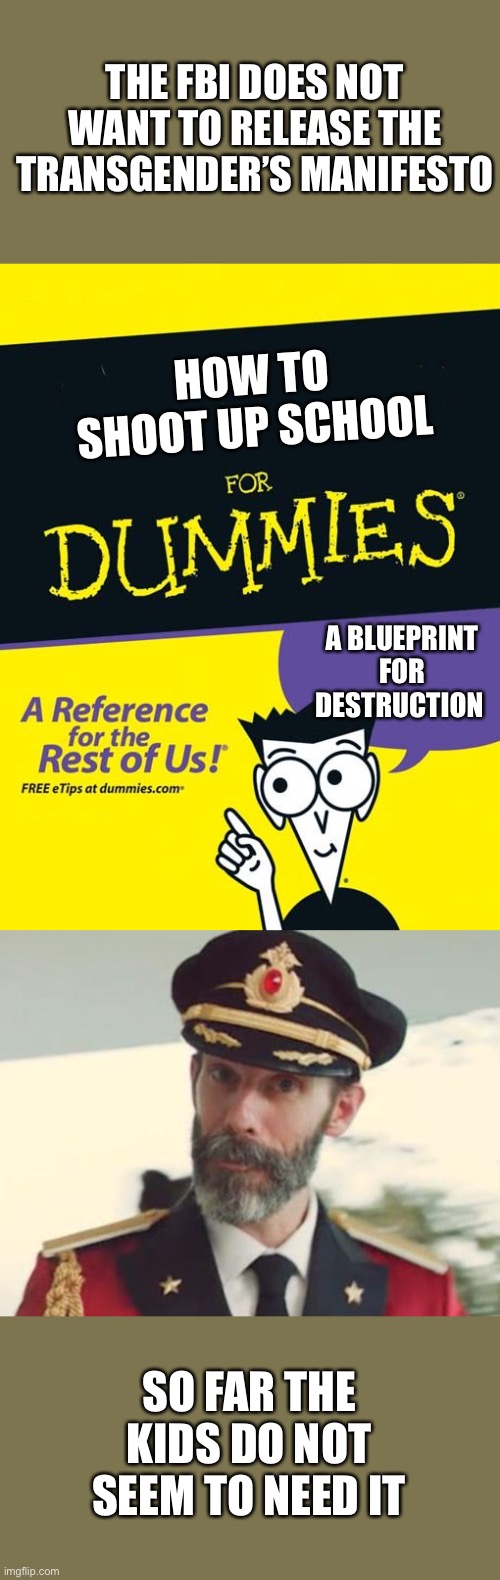 FBI needs to release the manifesto.The public has a right to know. | THE FBI DOES NOT WANT TO RELEASE THE TRANSGENDER’S MANIFESTO; HOW TO
SHOOT UP SCHOOL; A BLUEPRINT FOR DESTRUCTION; SO FAR THE KIDS DO NOT SEEM TO NEED IT | image tagged in for dummies book,captain obvious,transgender shooter,manifesto | made w/ Imgflip meme maker